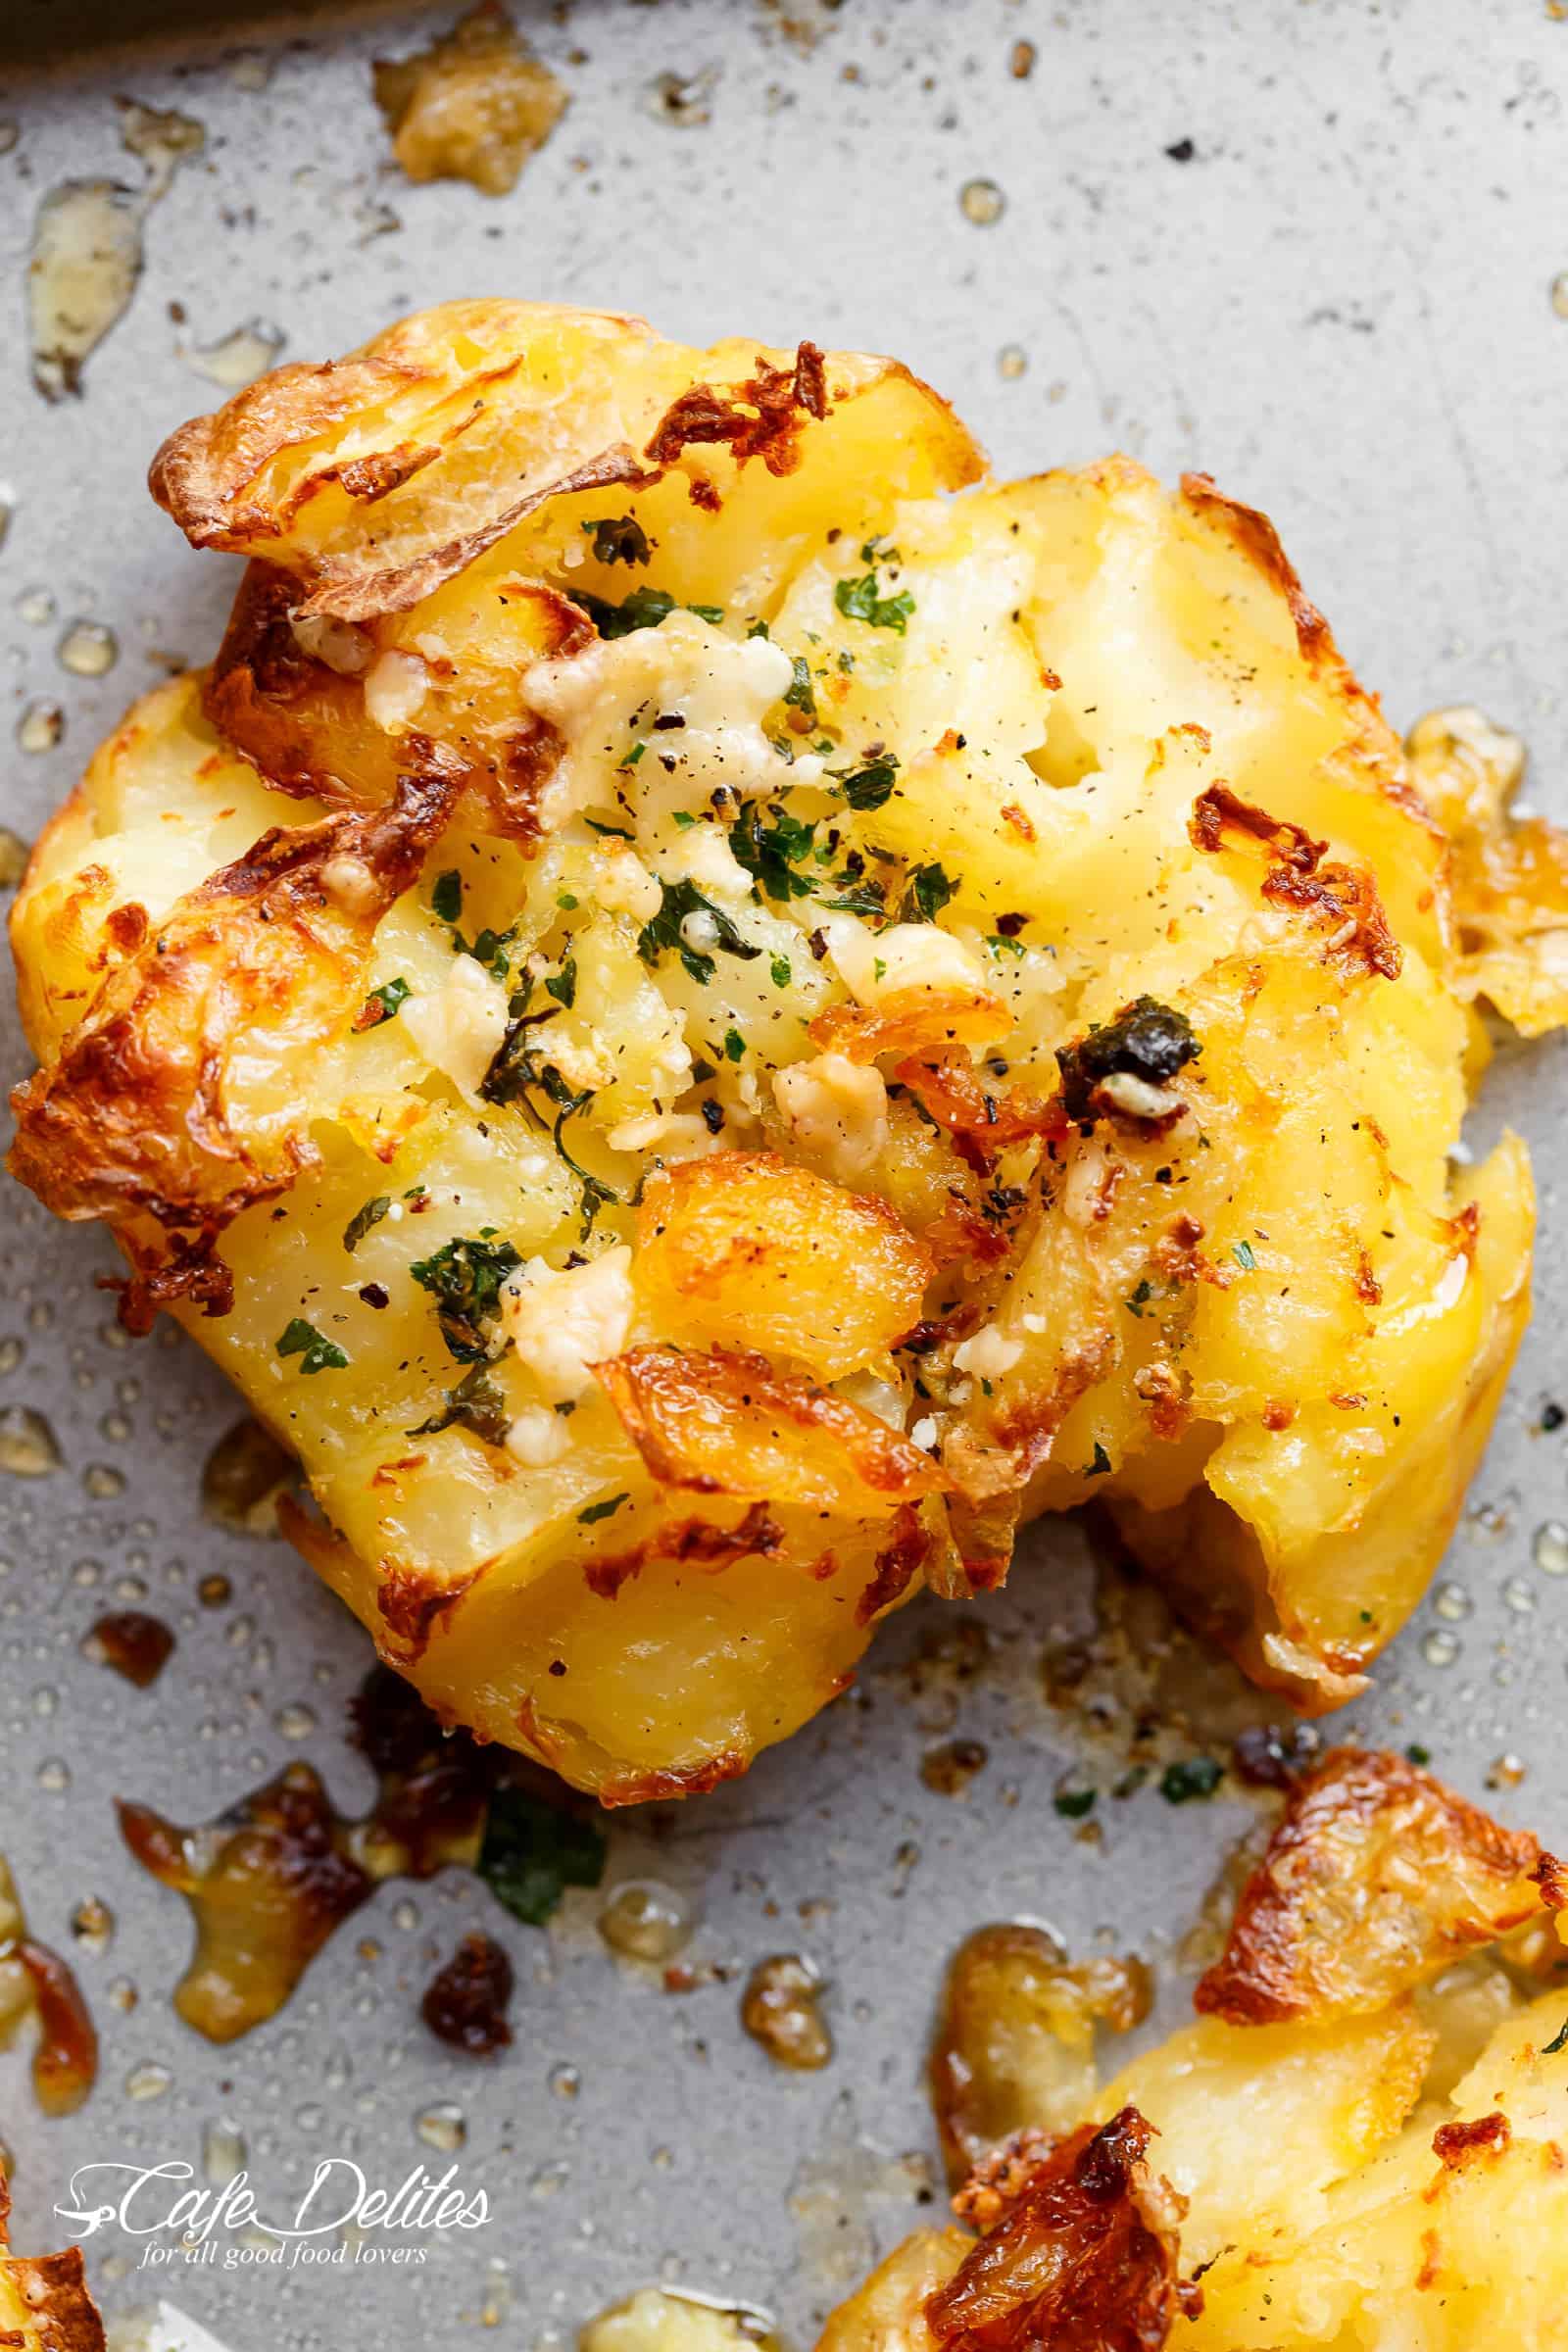 Crispy Garlic Butter Parmesan Smashed Potatoes with crispy edges that will send you over the edge! | http://cafedelites.com